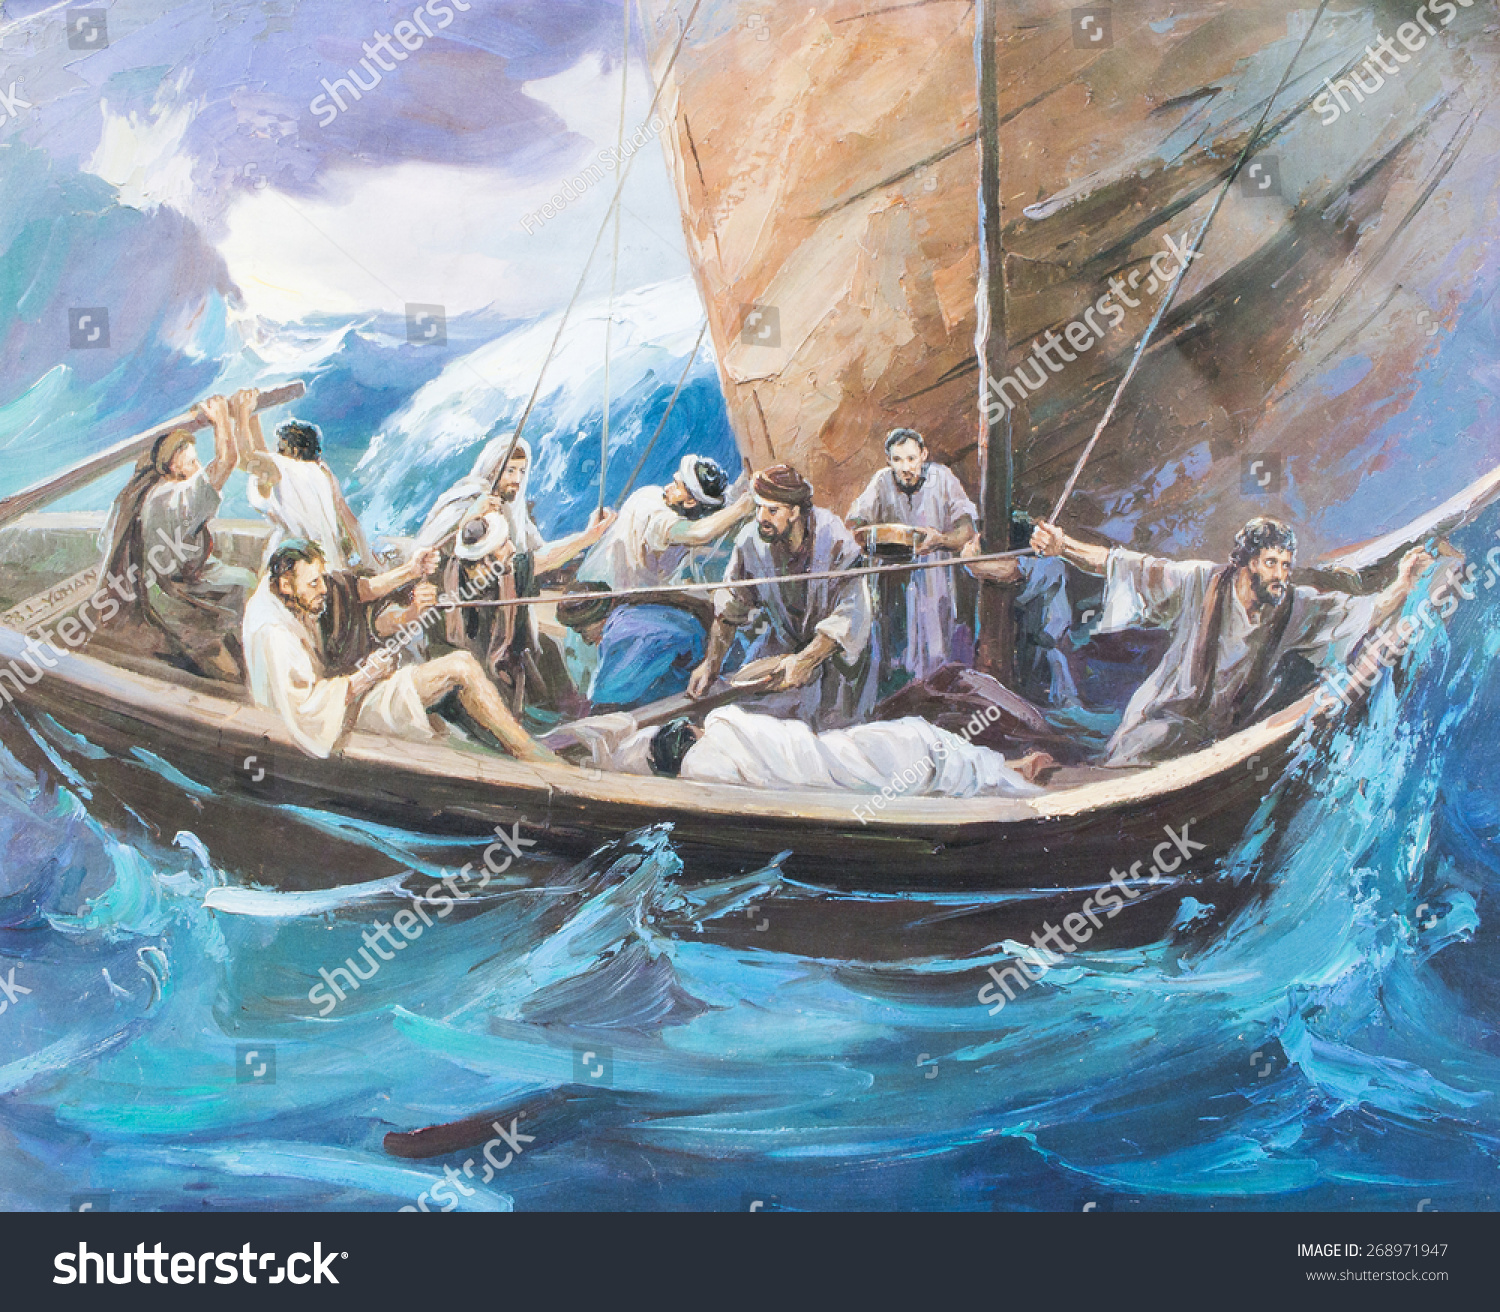 jesus in a boat clipart - photo #33